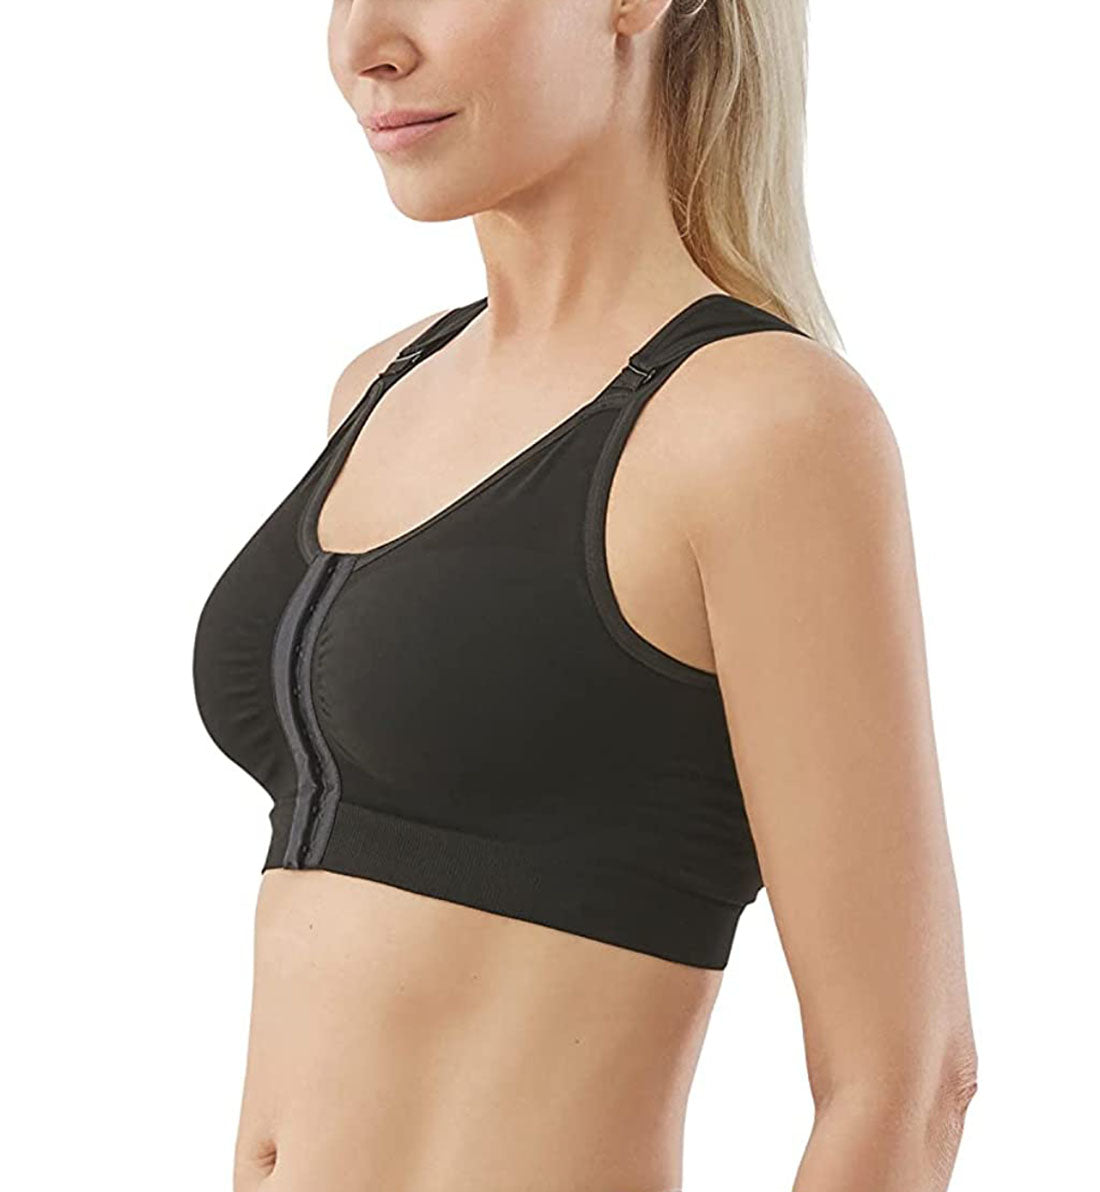 Carefix Bree Post-Op Wire Free Front Close Recovery Bra (3831